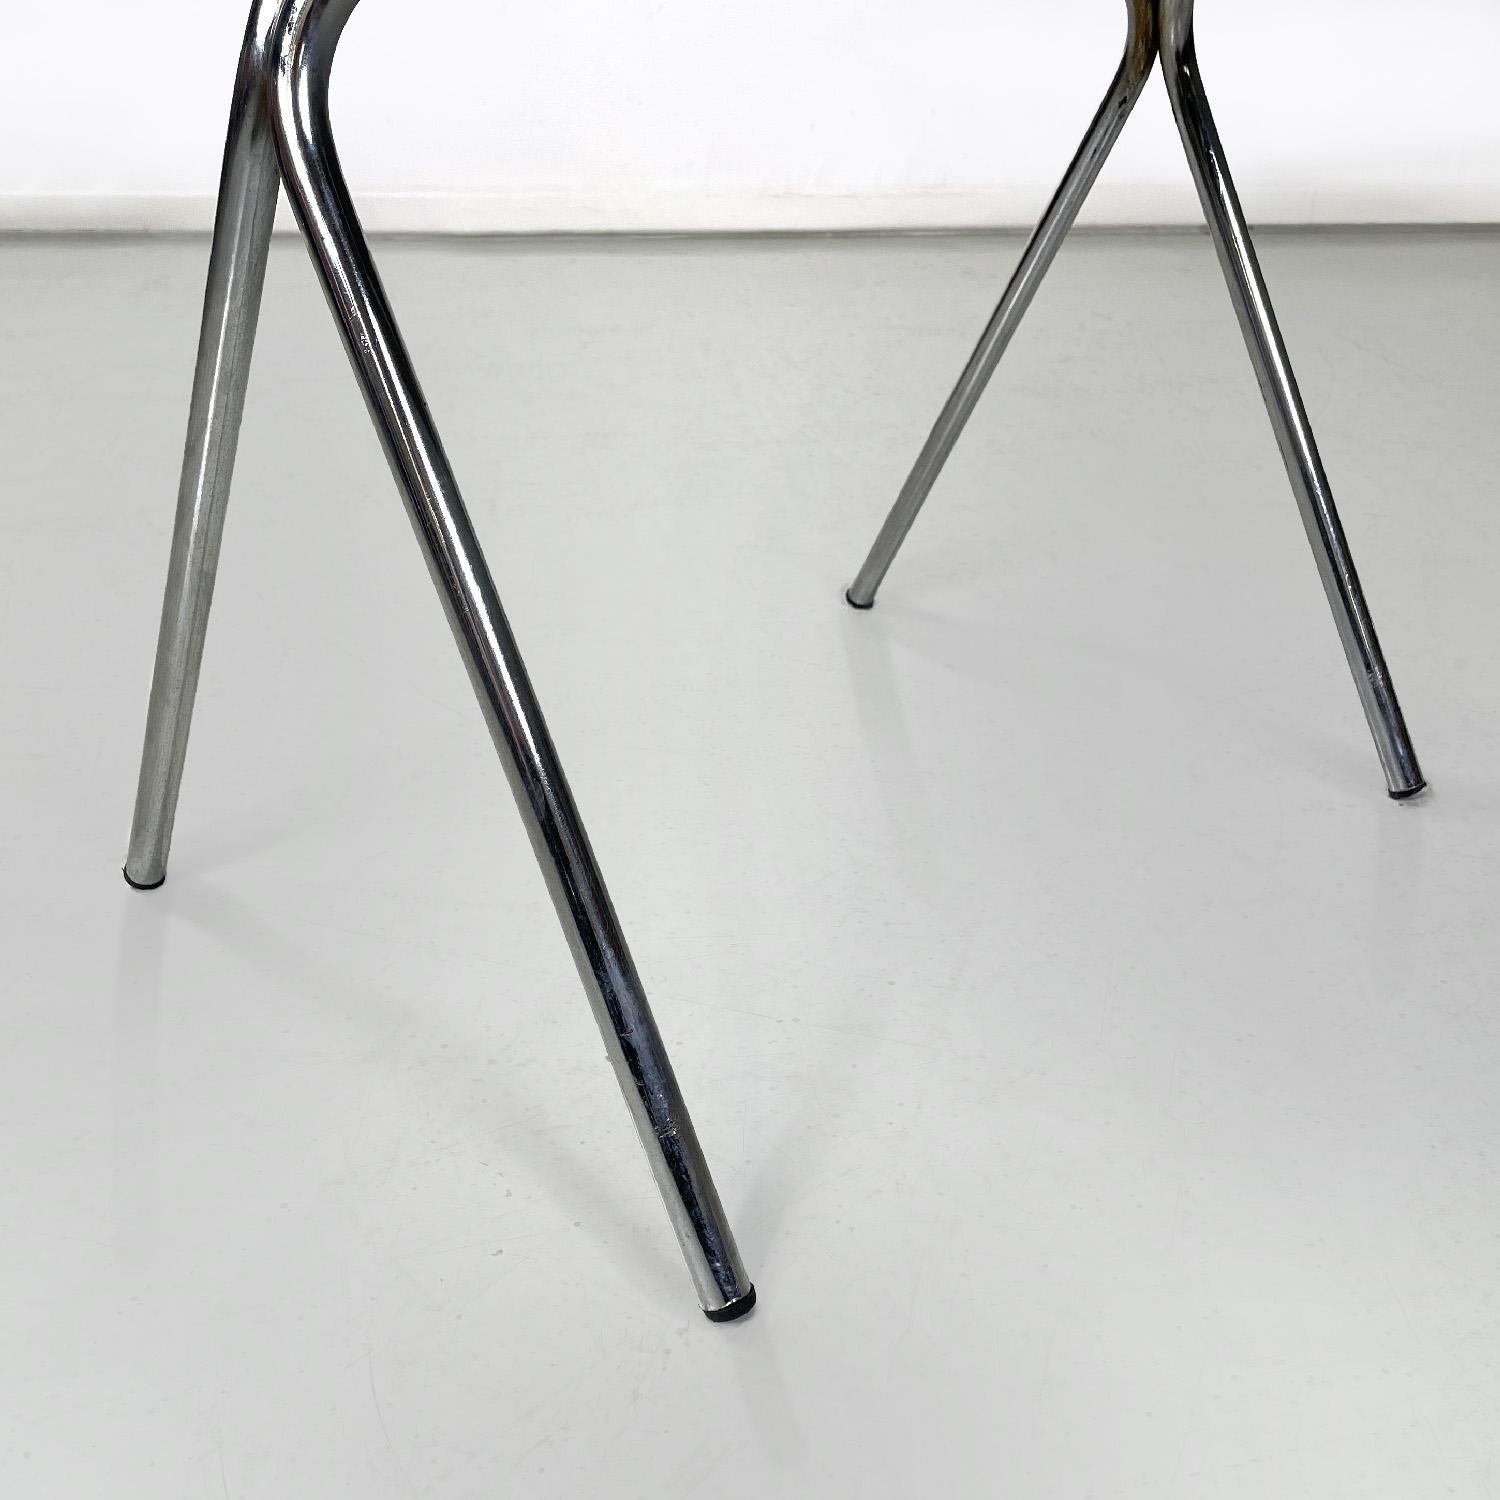 Italian modern stackable chairs by Proinco in brown plastic, 1970s For Sale 5